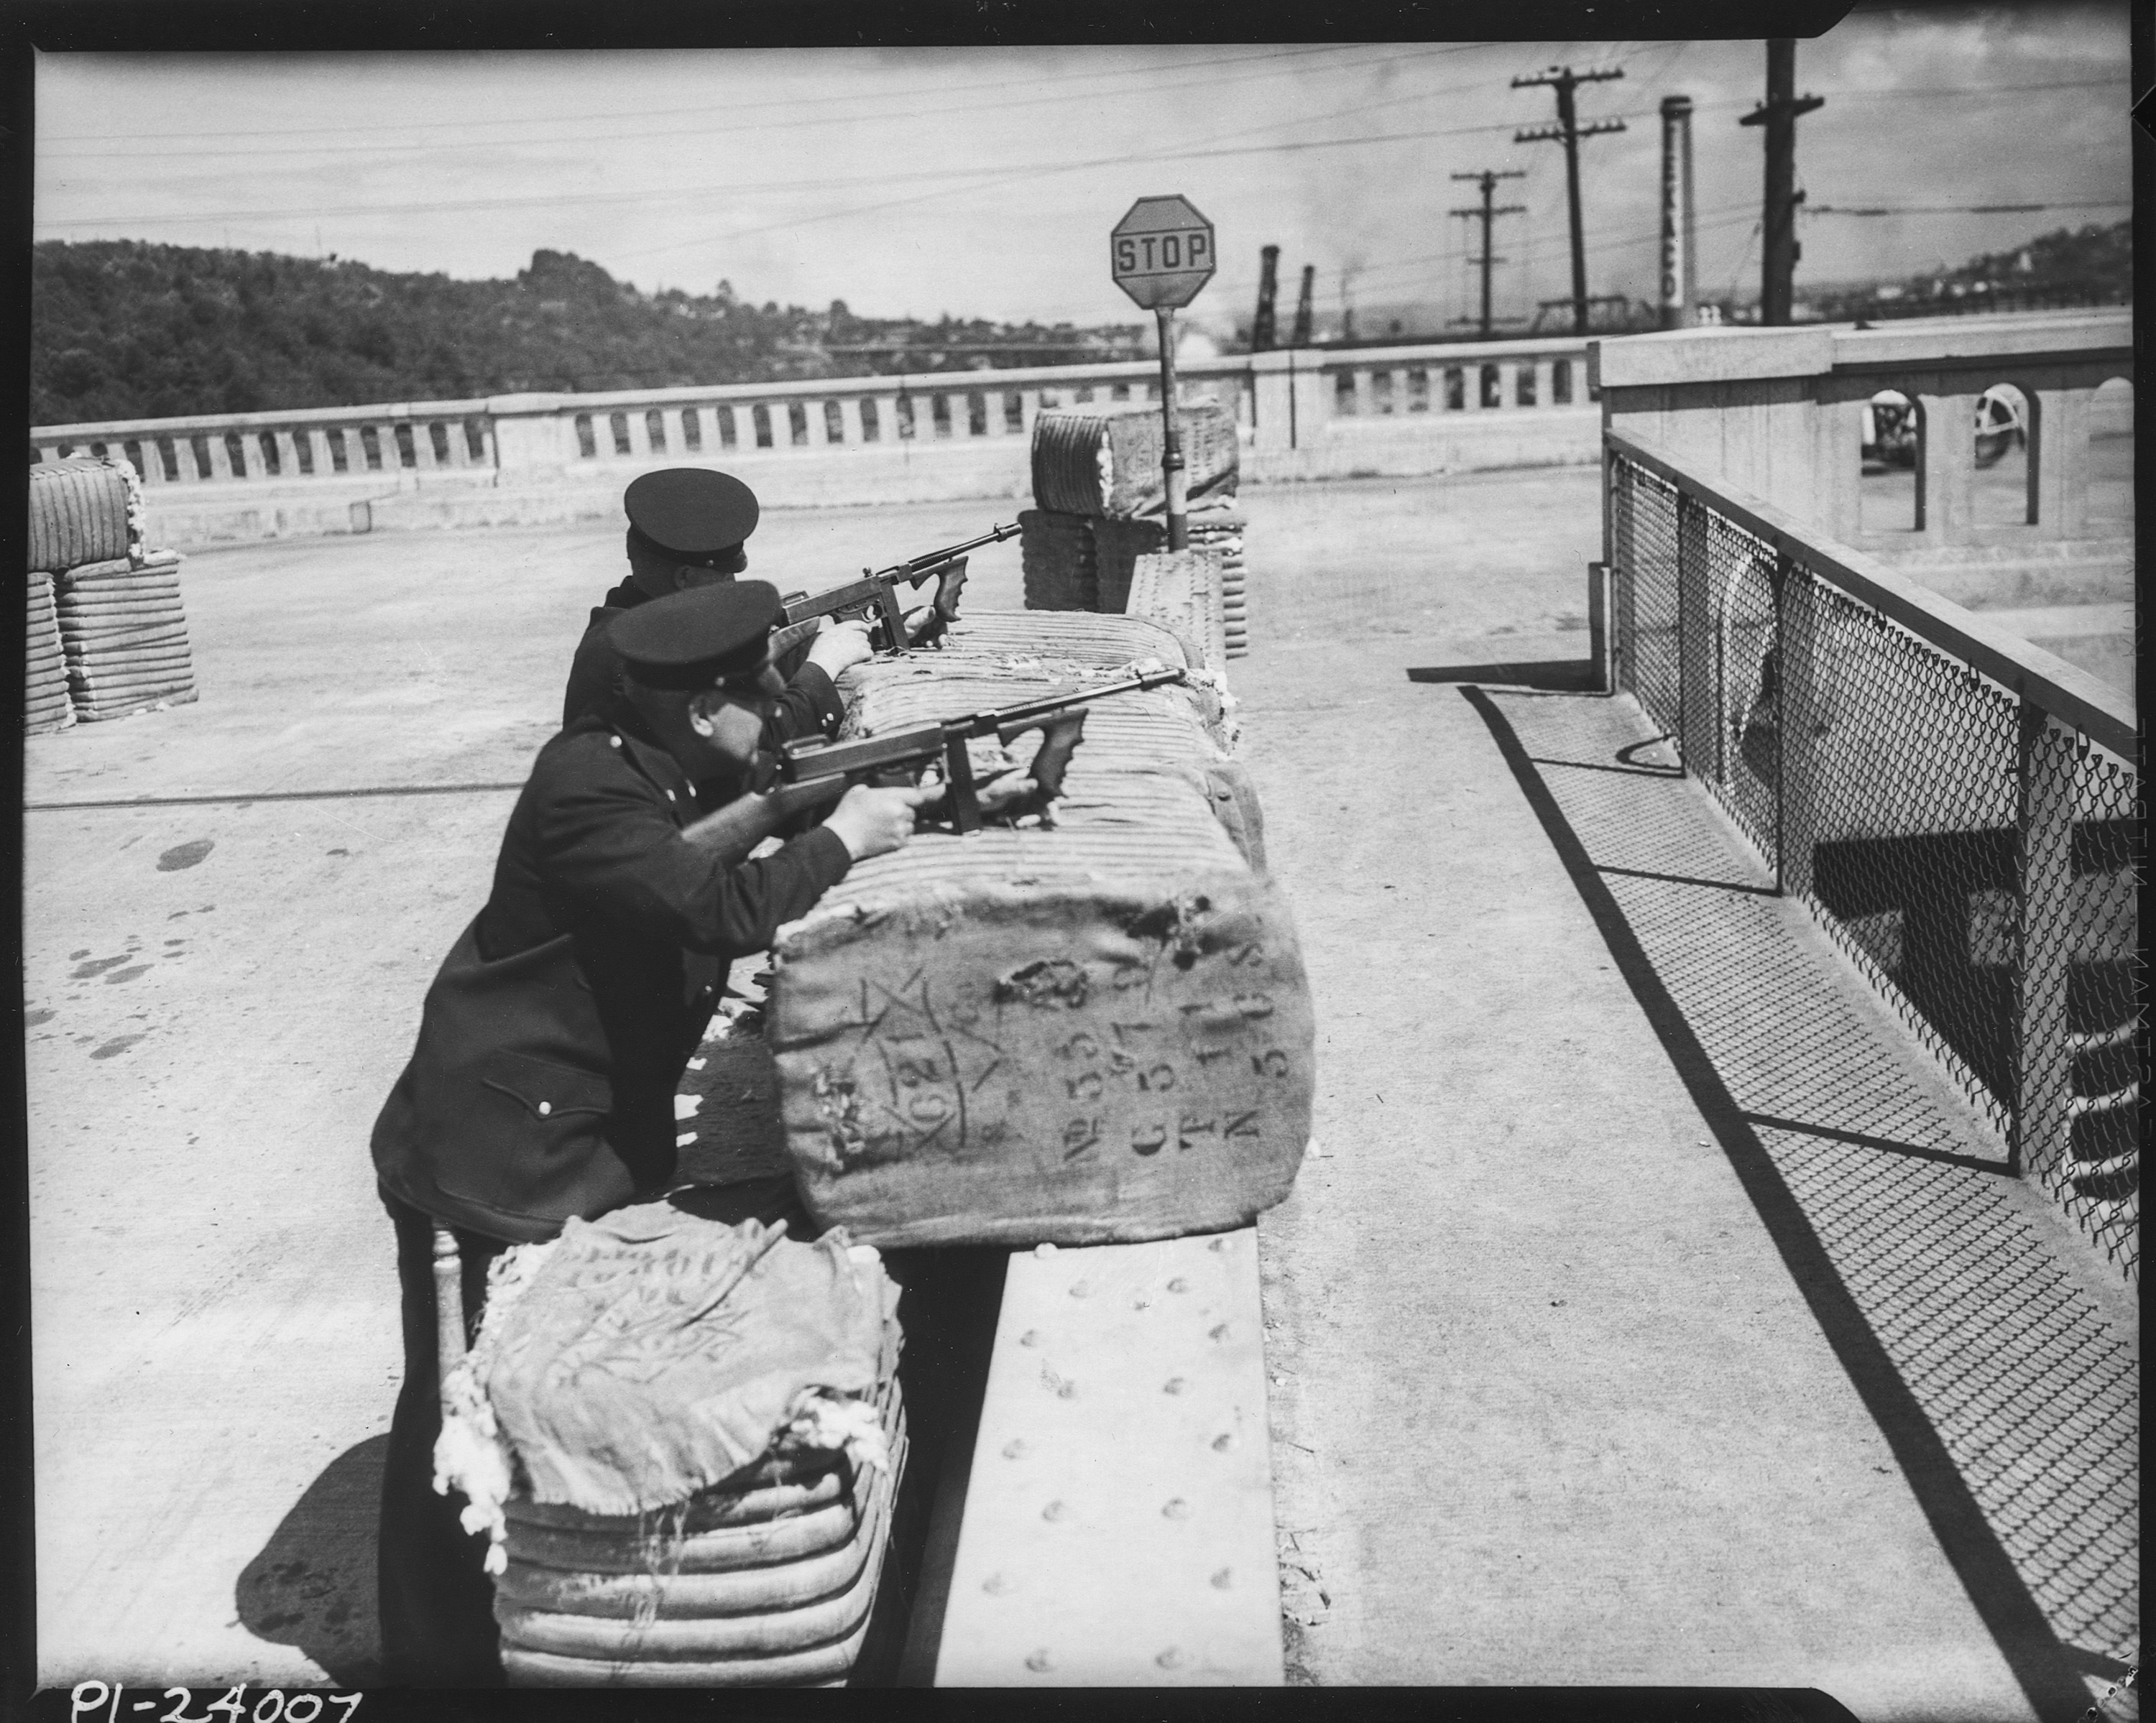 two policemen behind bales, black and white